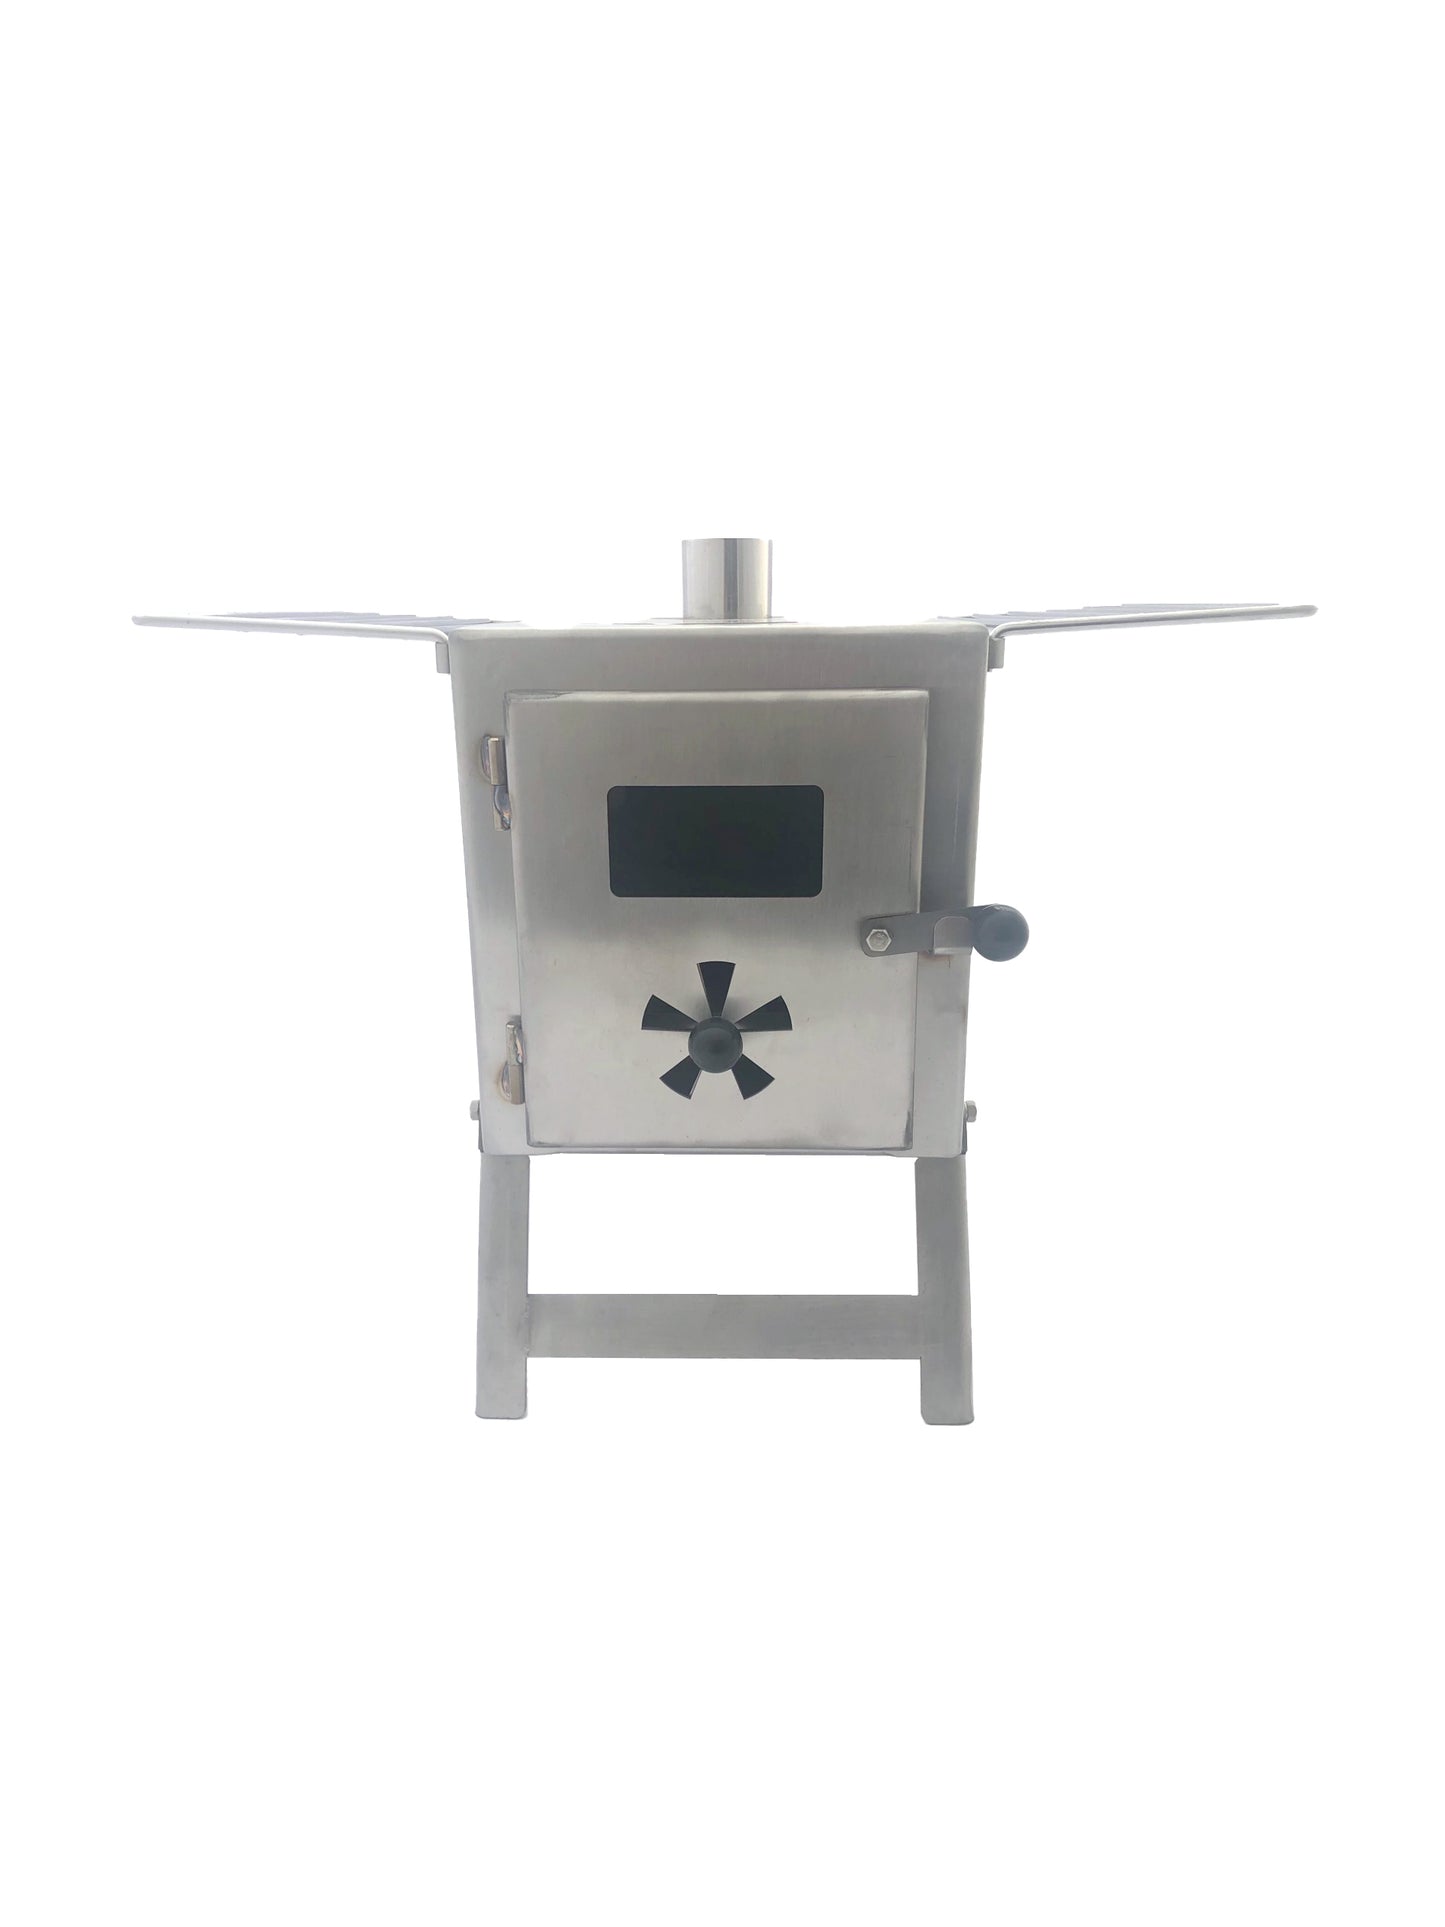 Nomad PRO Stainless Steel | Tent Stove with Eco-Burn